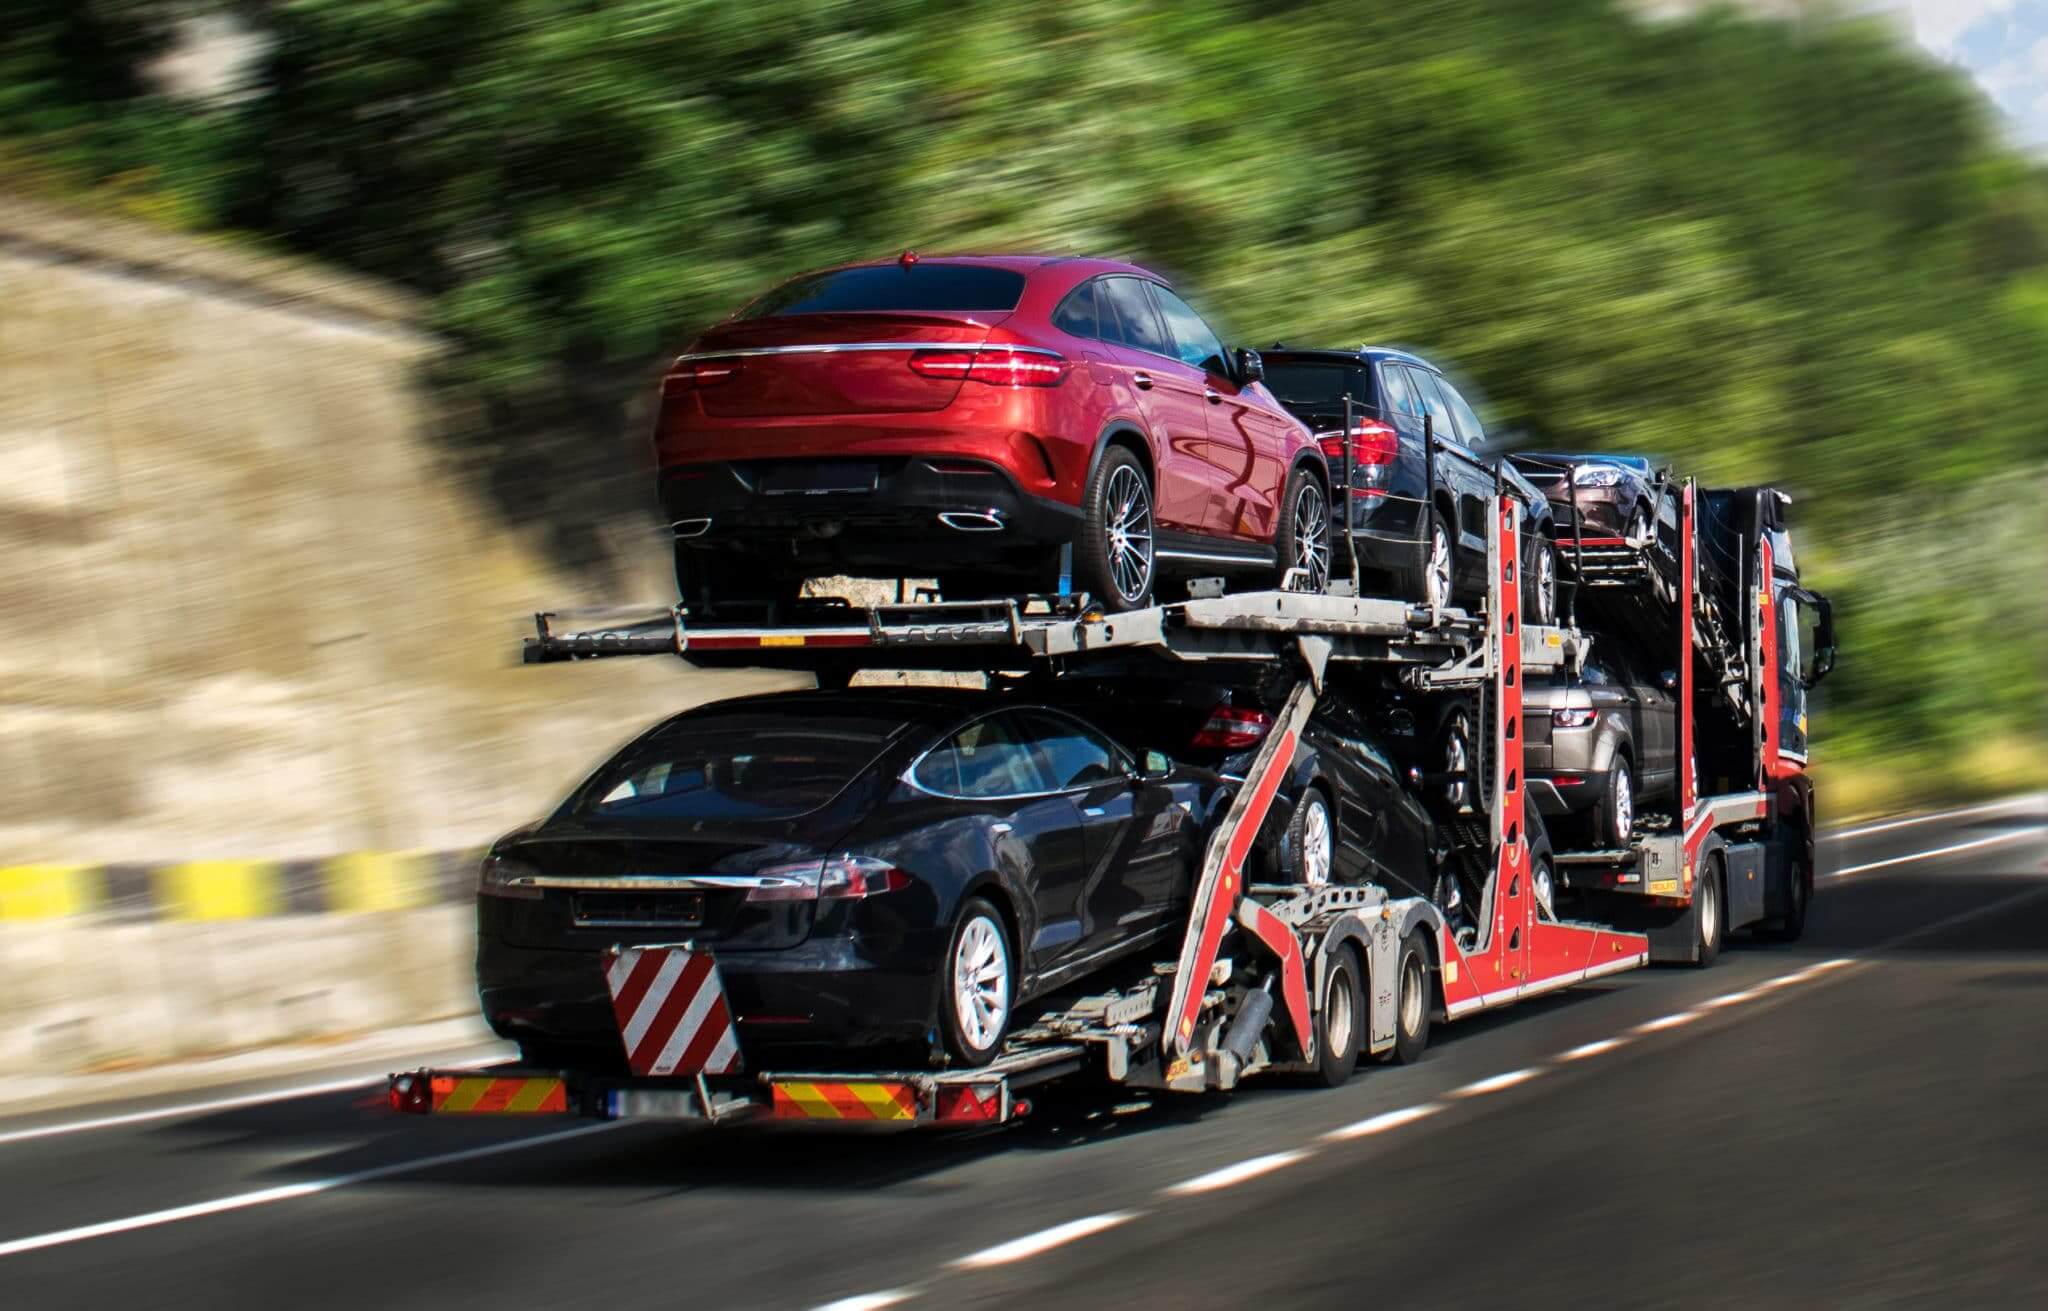 Open Carrier Transporting Cars on a Highway | National Transport Services what is the cost to ship a car?